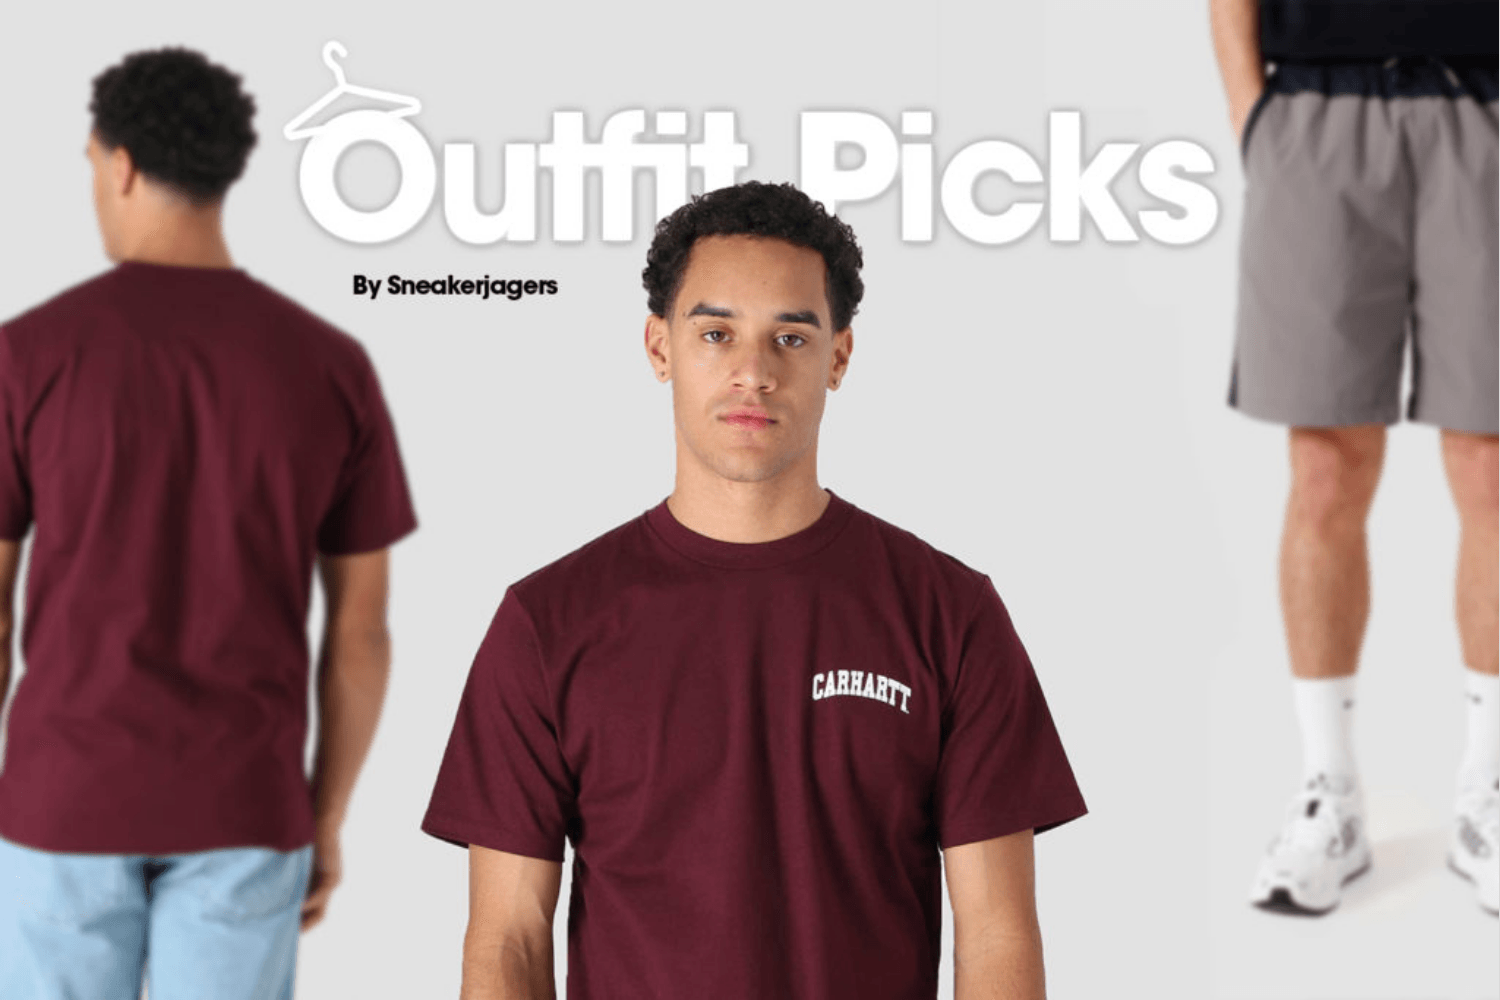 Outfit Picks by Sneakerjagers - Woche 24